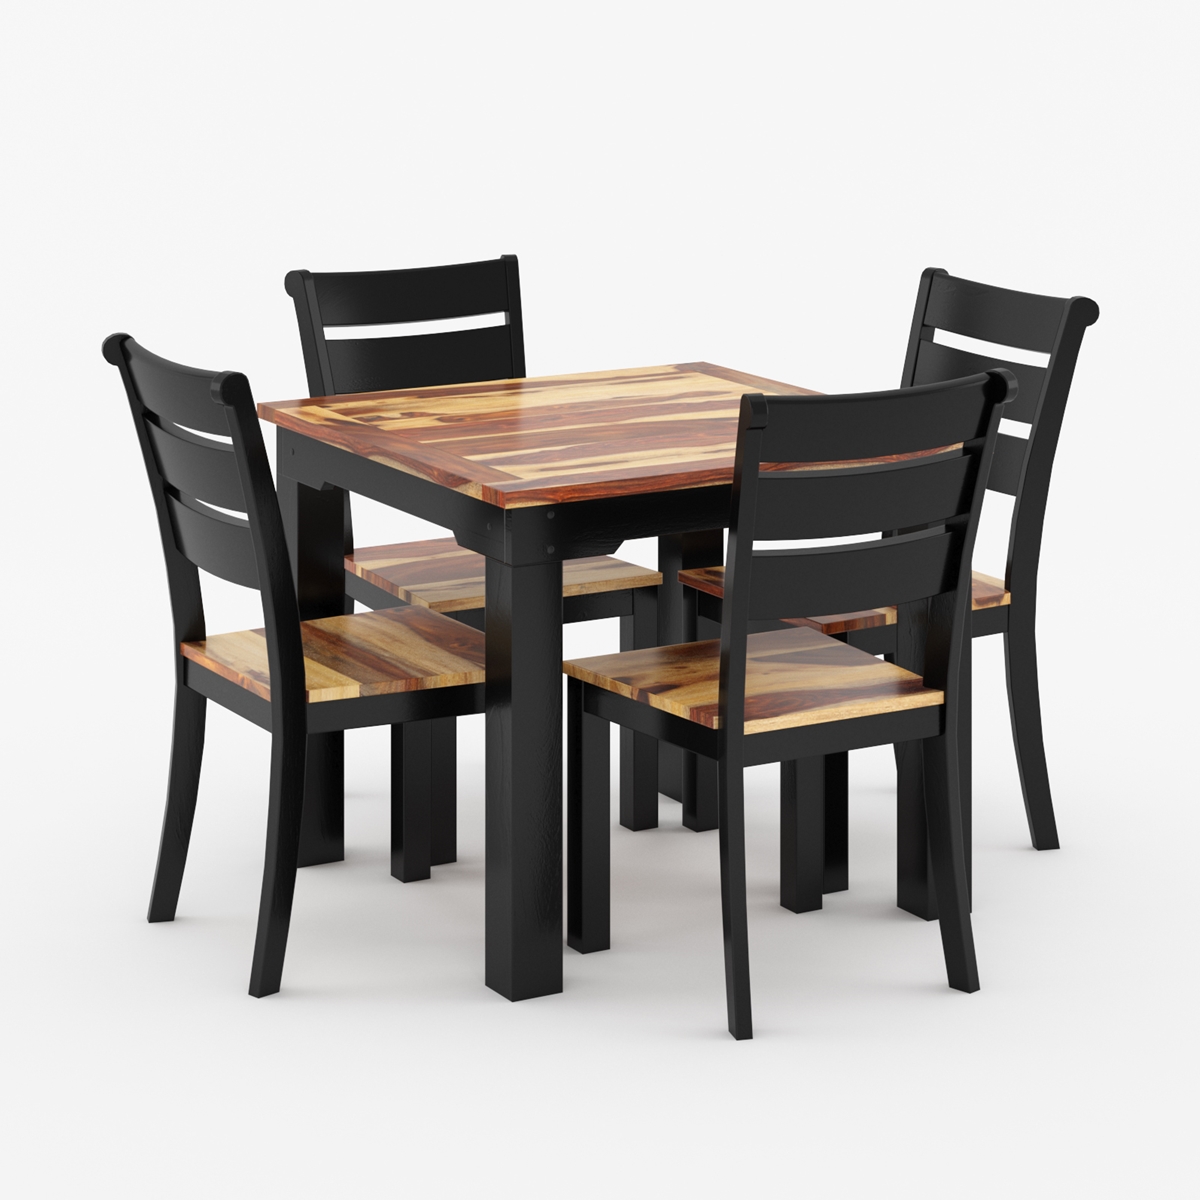 Mason Two Toned Small Square Kitchen Table and 4 Chairs Set